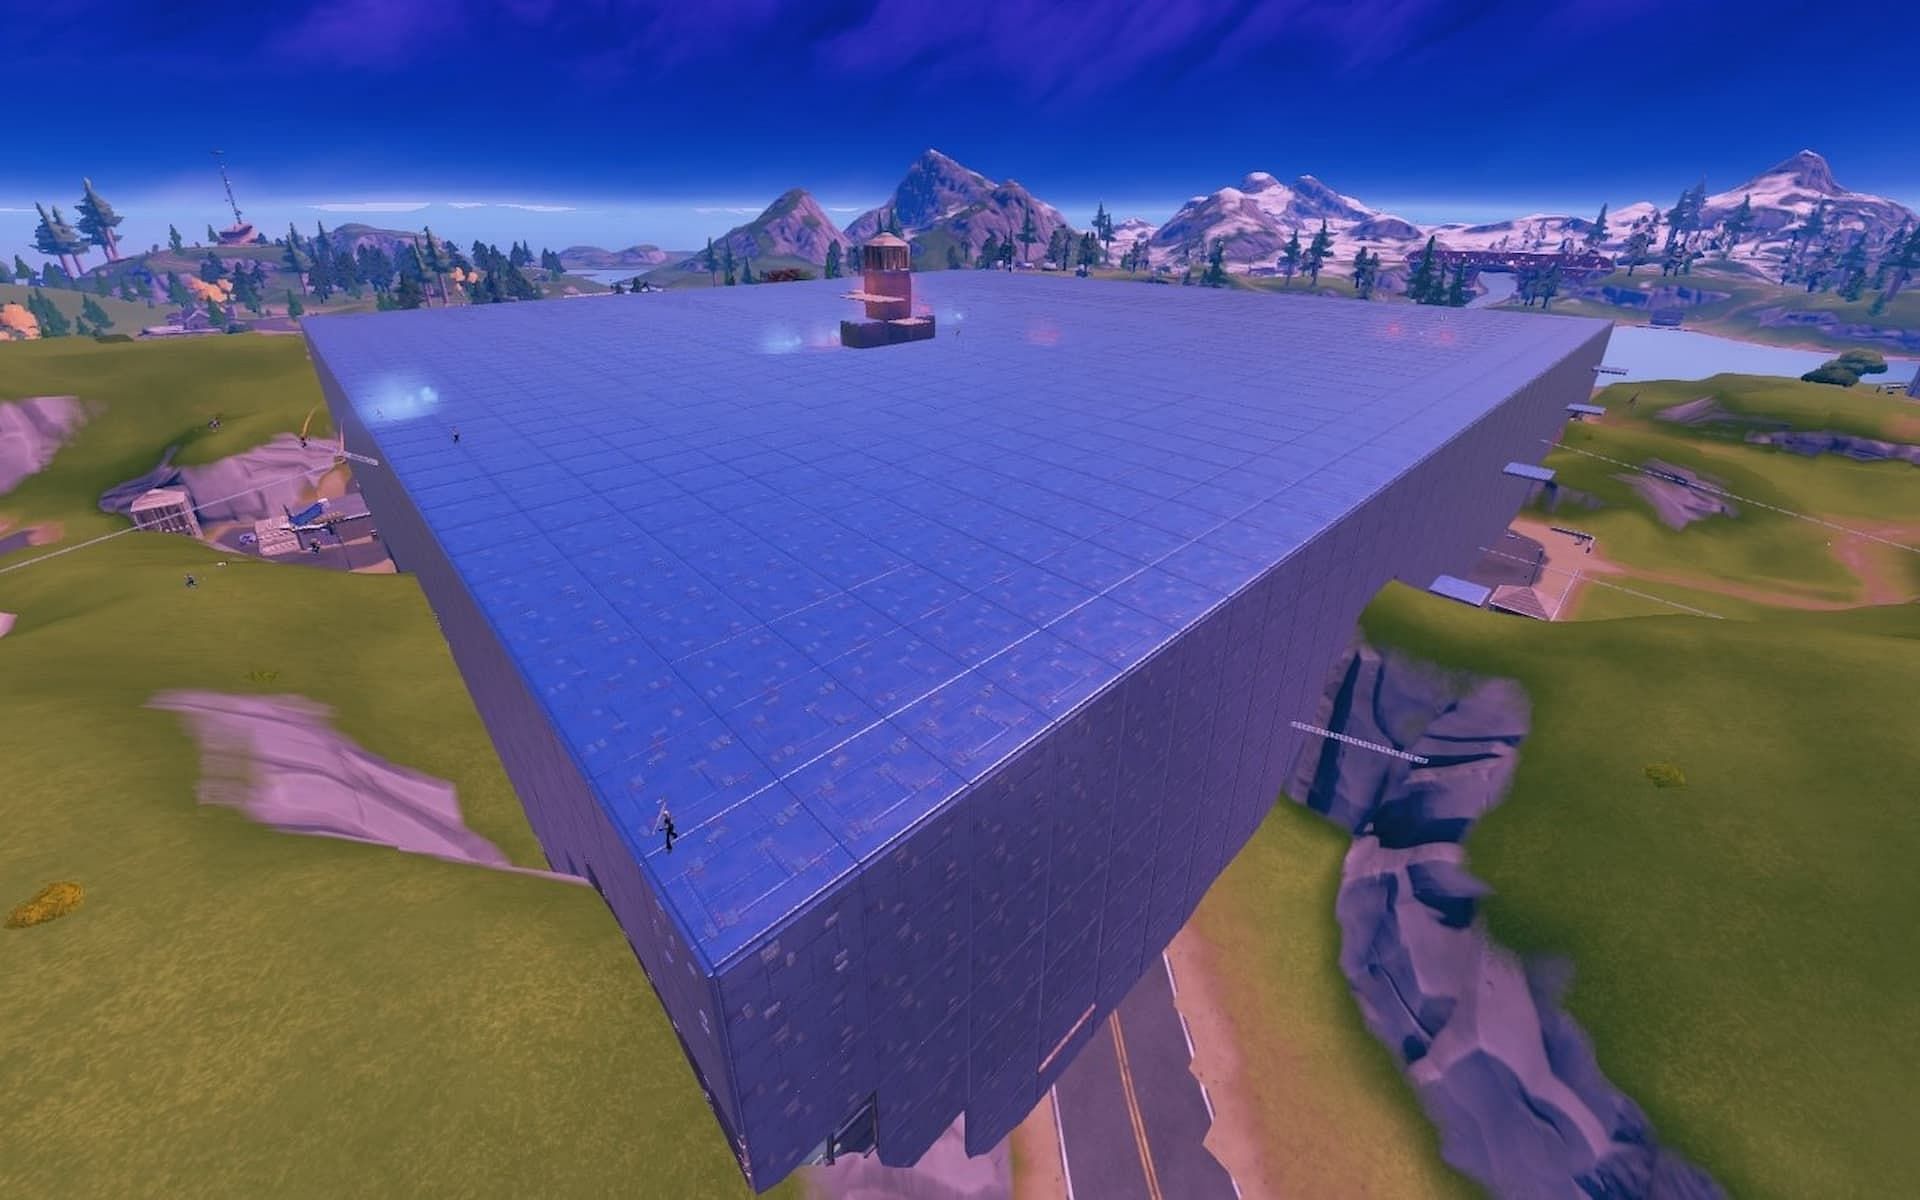 Tilted Towers enclosed in an armored box (Image via Epic Games / ItsCatGurl)